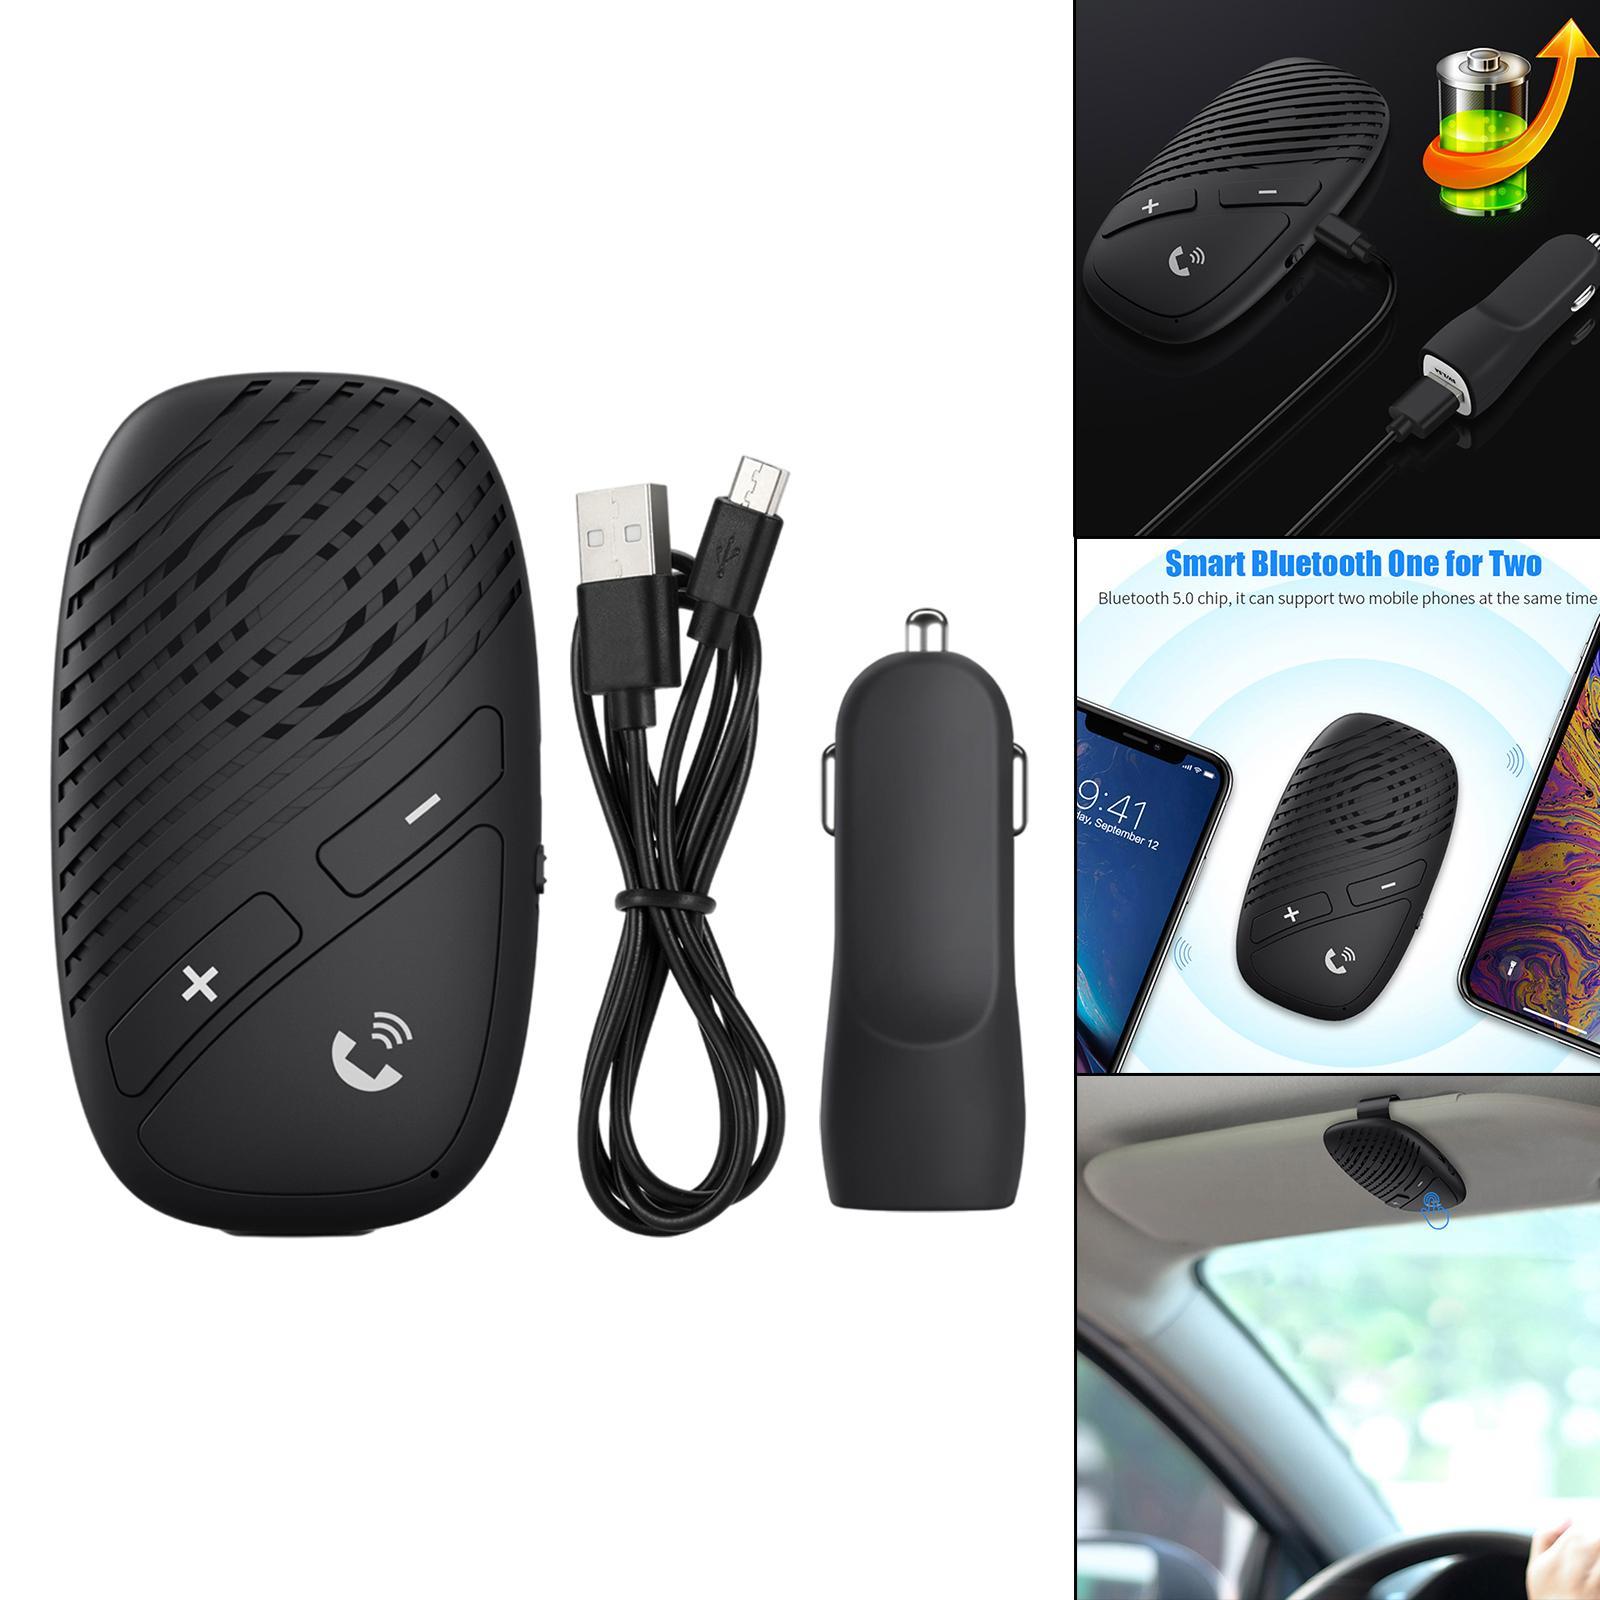 Bluetooth Wireless Car Speakerphone, Handsfree Sun Visor Speaker with Clear and Loud Sound ,Fits for Talking/ Music, with Visor Clip